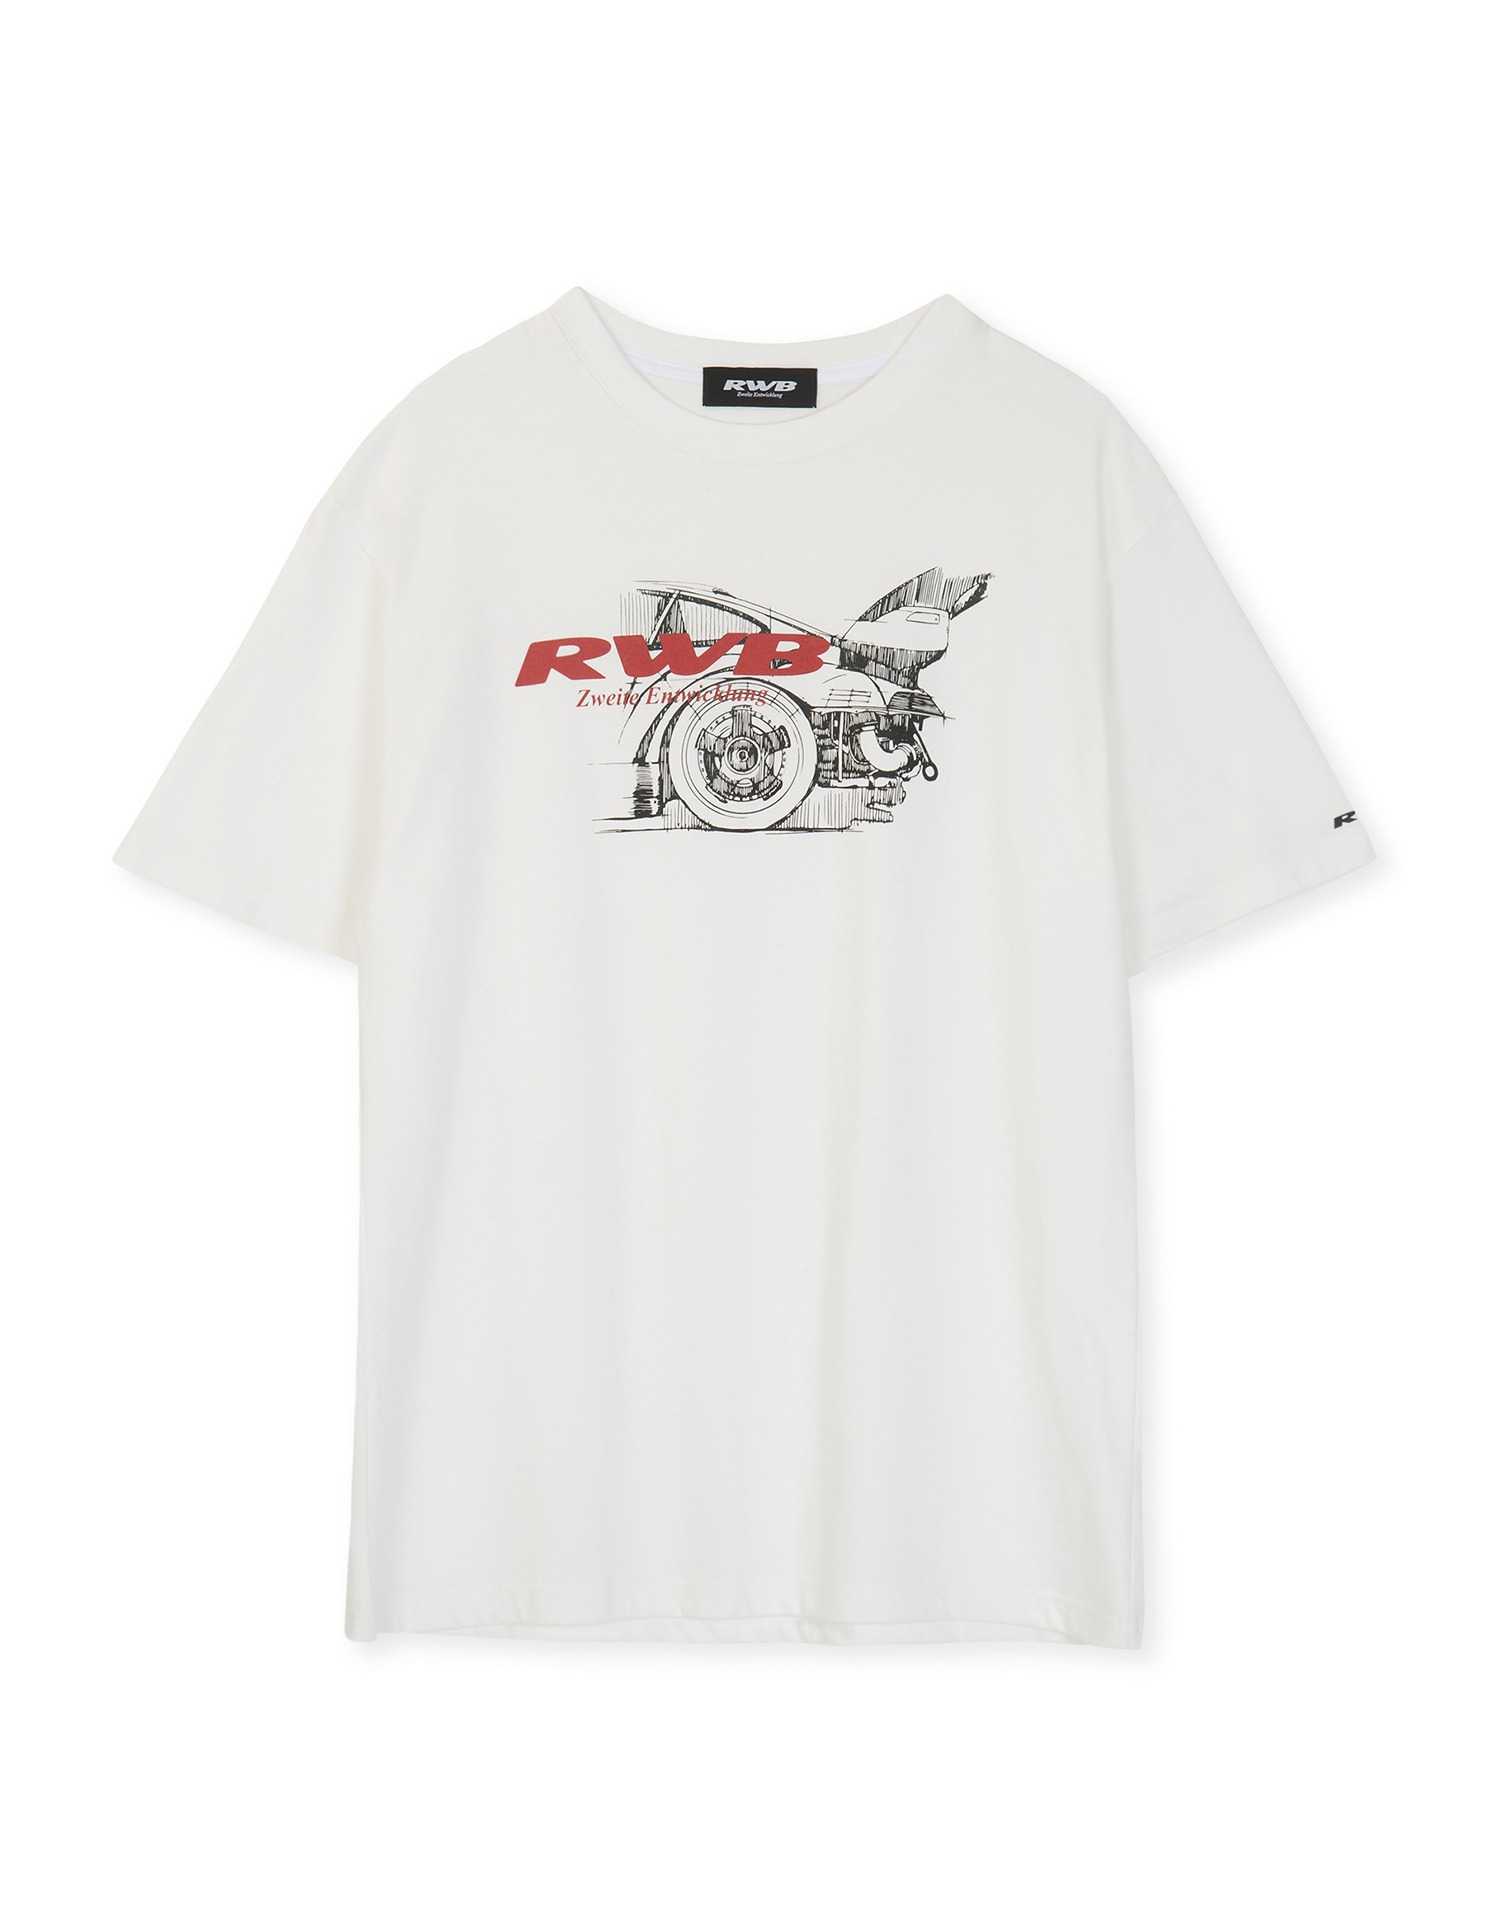 Rough Drawing S/S Tee - White